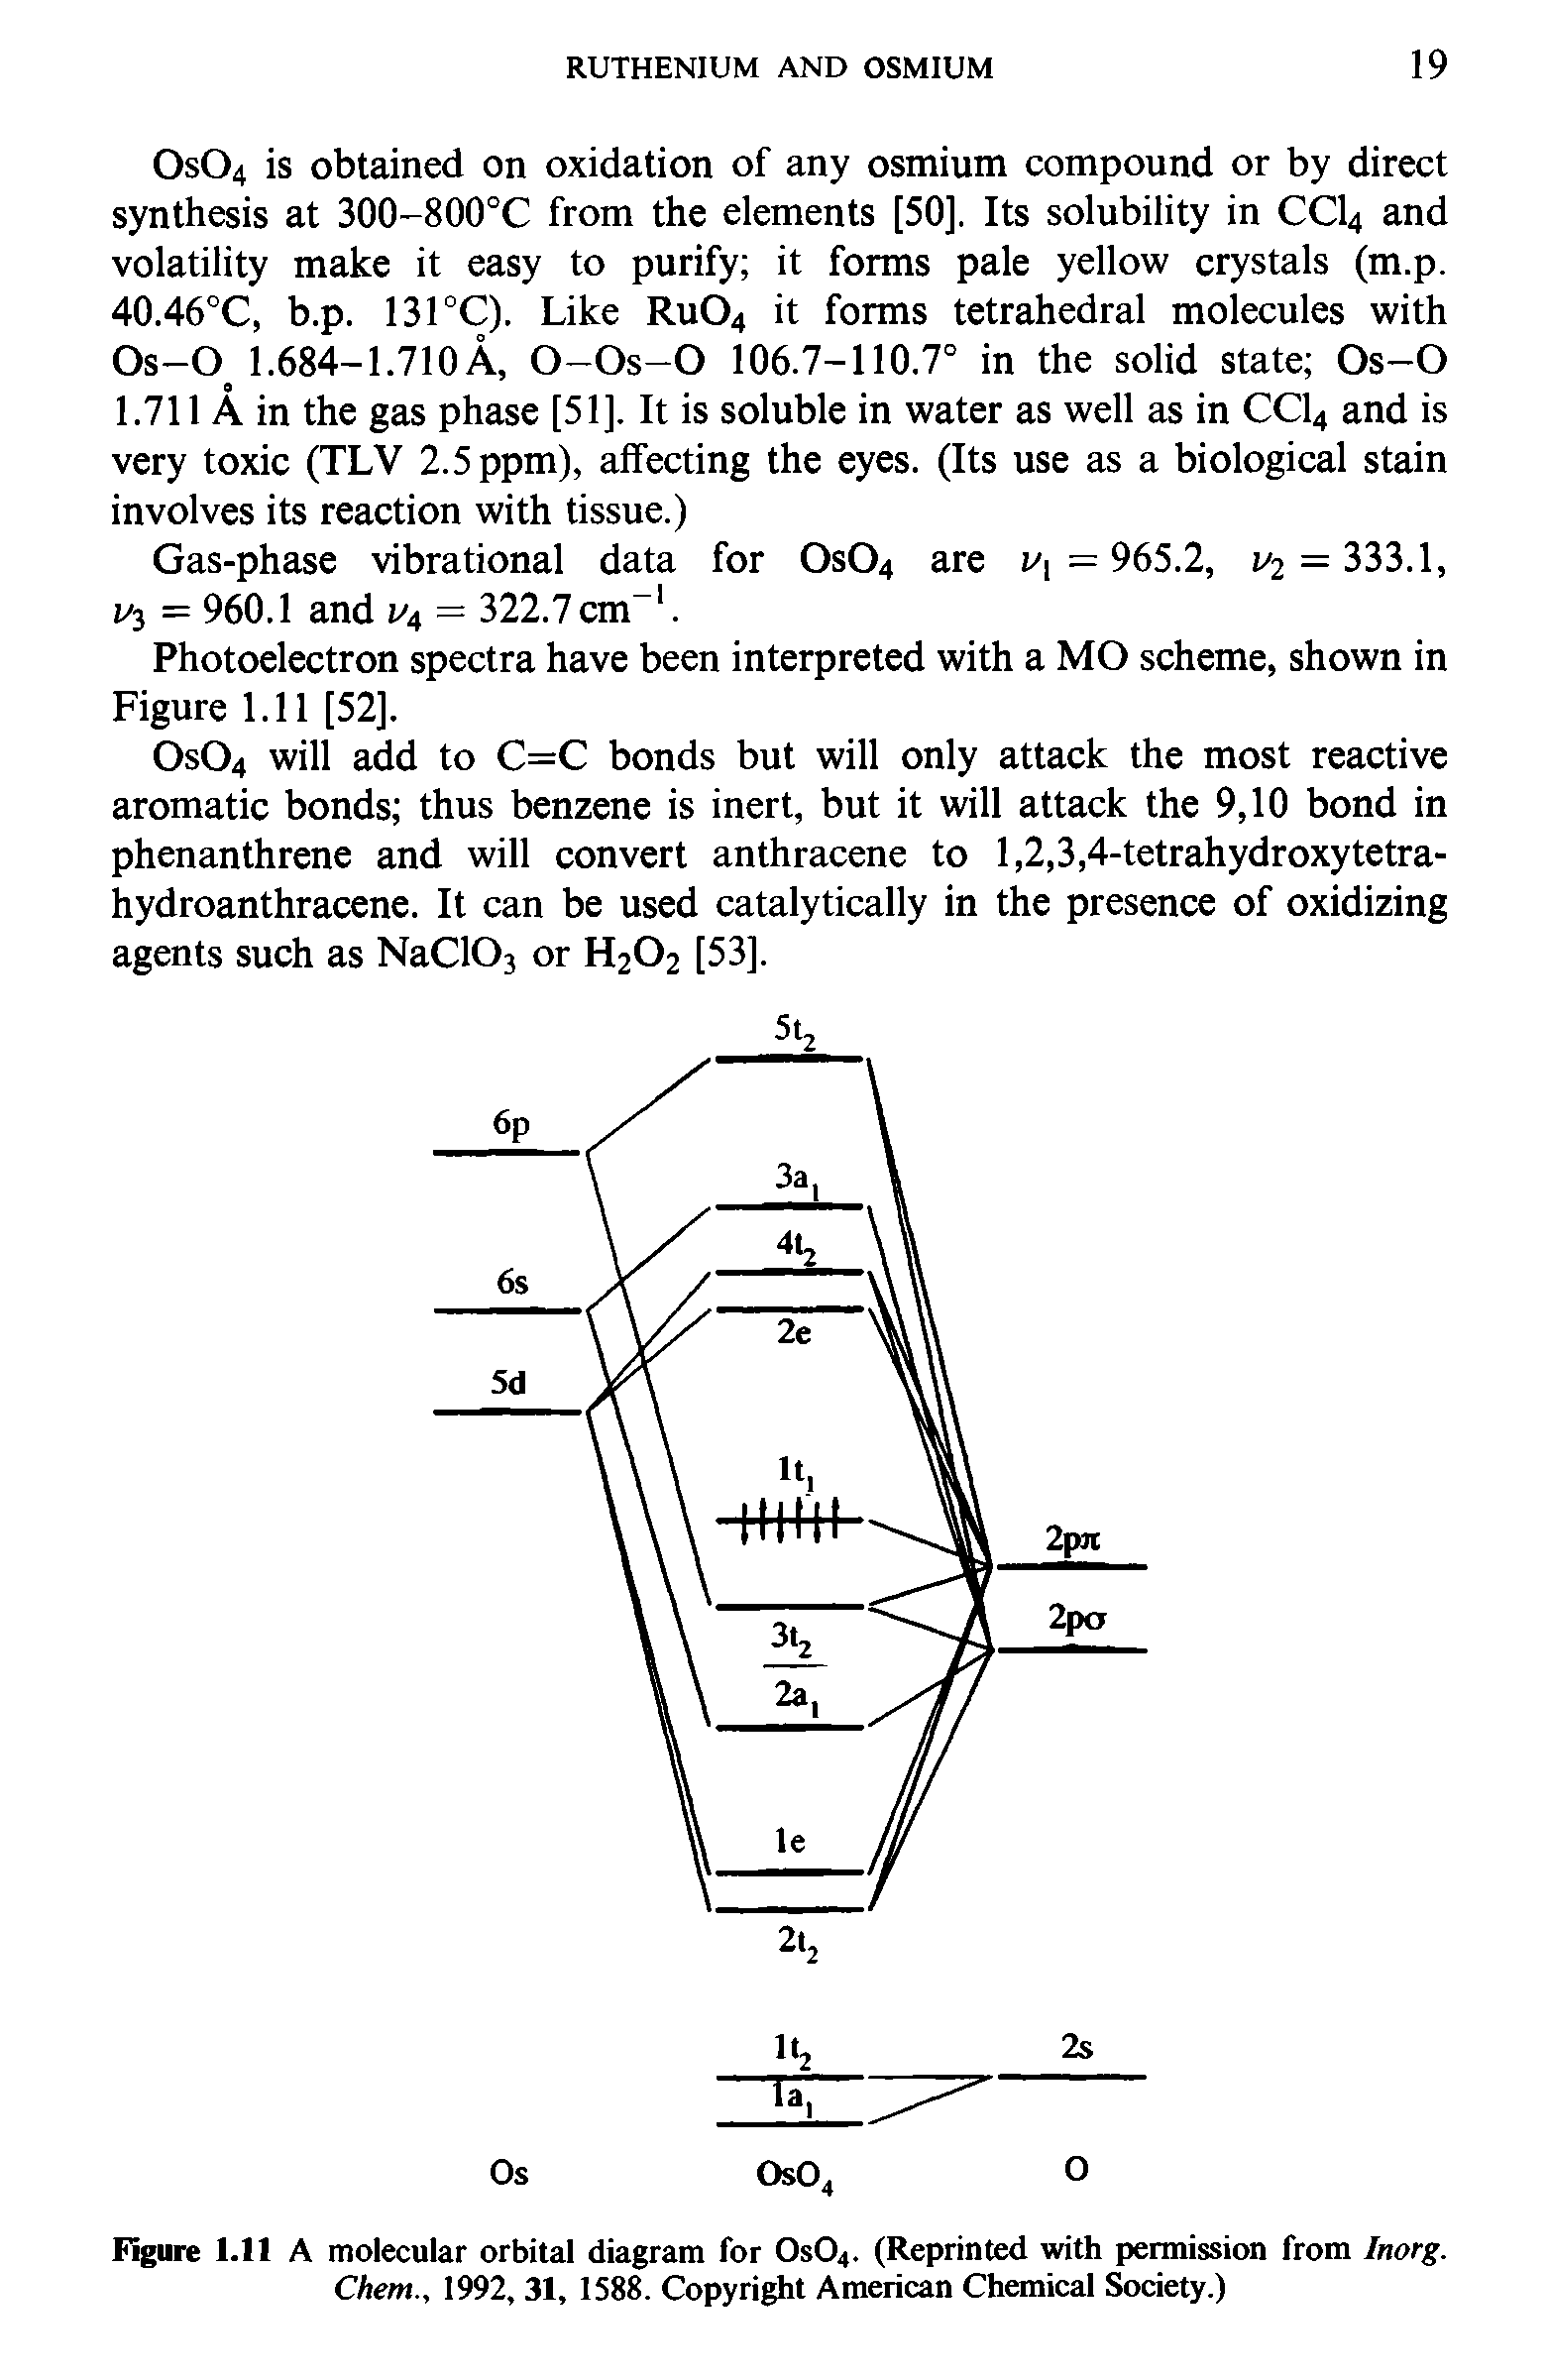 Figure 1.11 A molecular orbital diagram for OSO4. (Reprinted with permission from Inorg. Chem., 1992, 31, 1588. Copyright American Chemical Society.)...